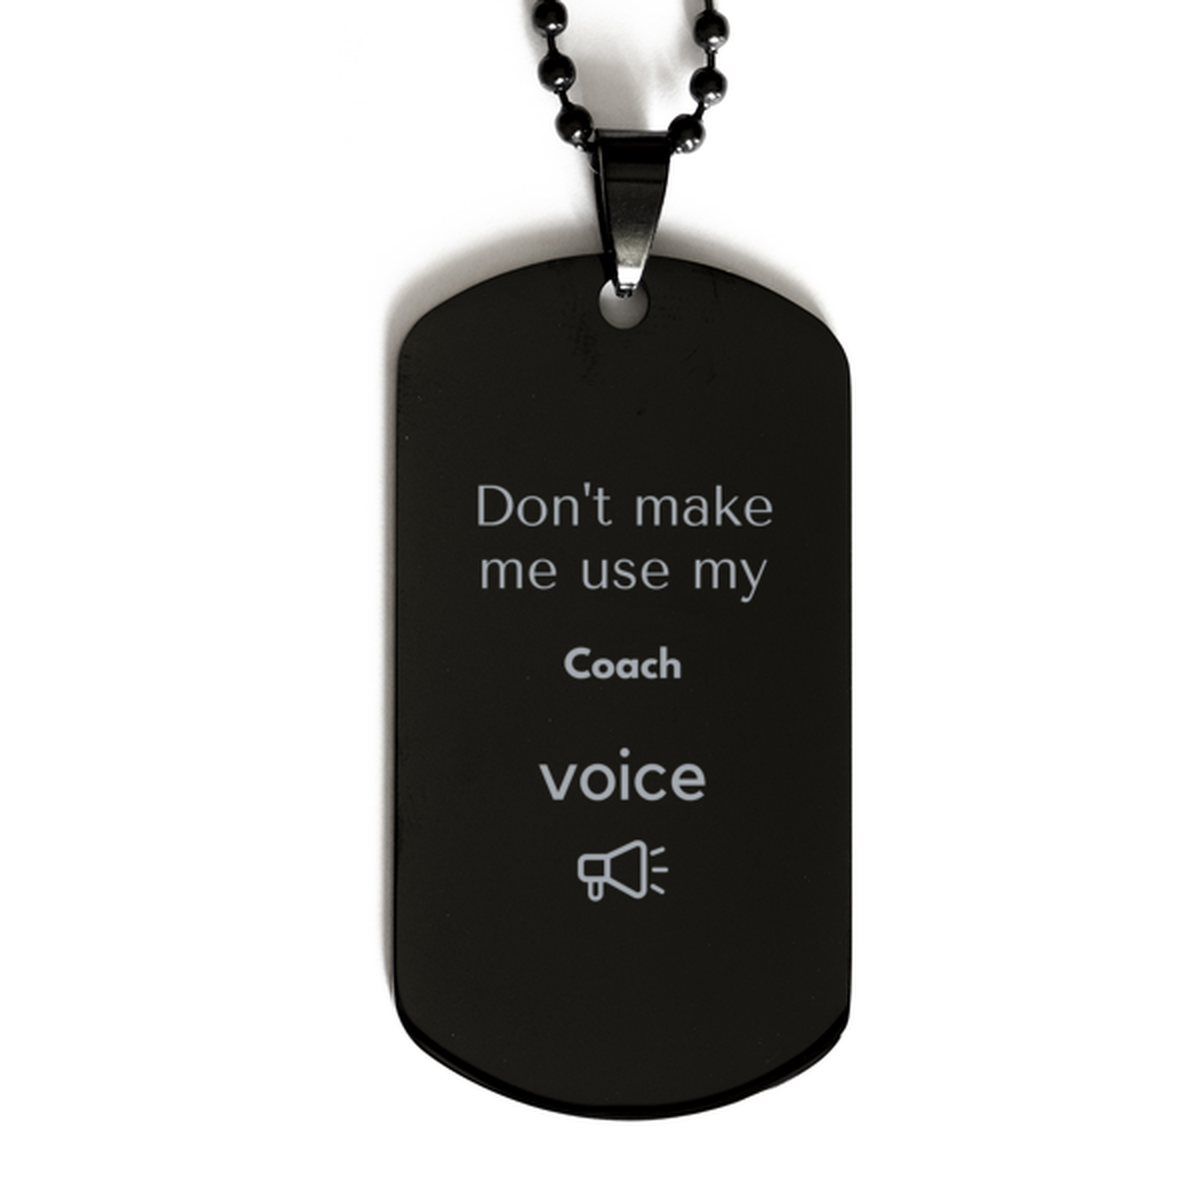 Don't make me use my Coach voice, Sarcasm Coach Gifts, Christmas Coach Black Dog Tag Birthday Unique Gifts For Coach Coworkers, Men, Women, Colleague, Friends